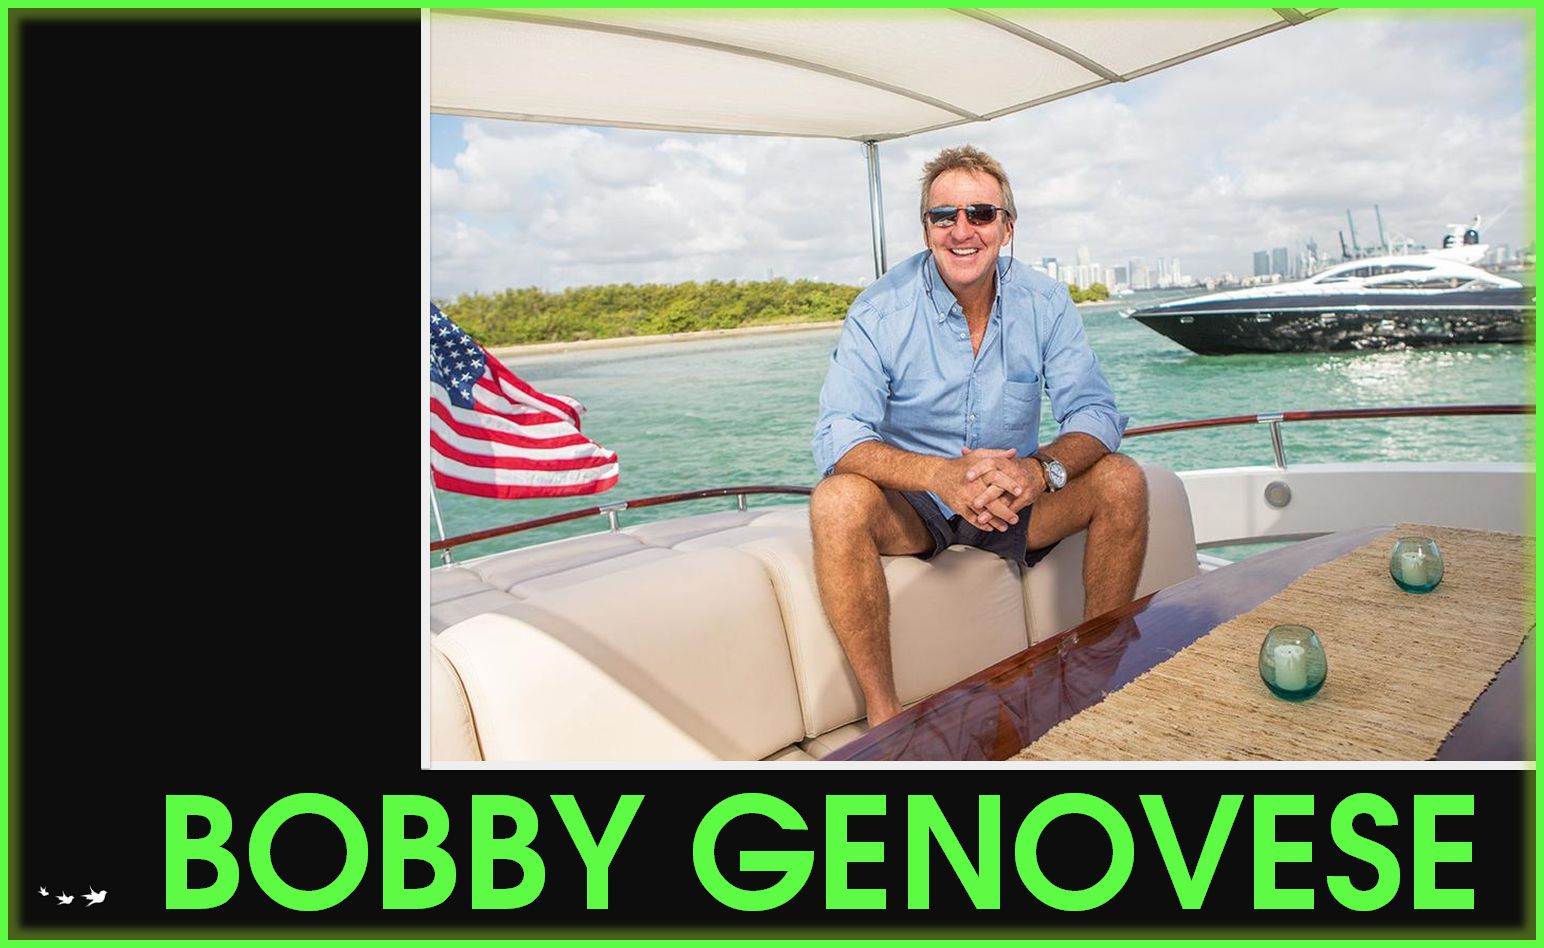 Bobby Genovese embracing life abroad podcast interview business travel website